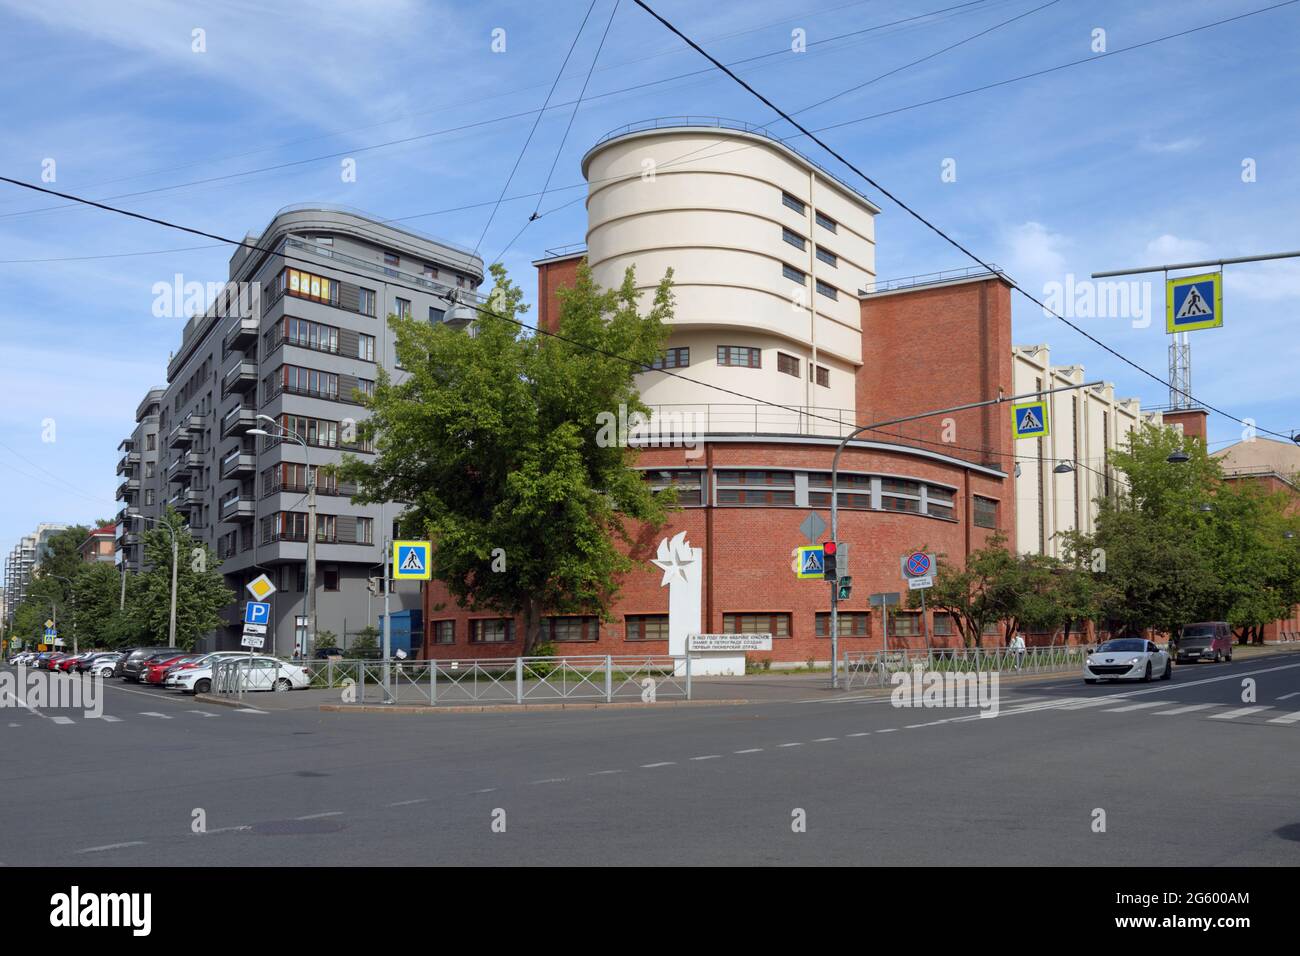 St. Petersburg, Russia, 14th June, 2021: Constructivist building of the power station of Krasnoe Znamya factory. The building, designed by German architect Erich Mendelsohn, was erected in 1926-1928, and now is listed as regional heritage object Stock Photo